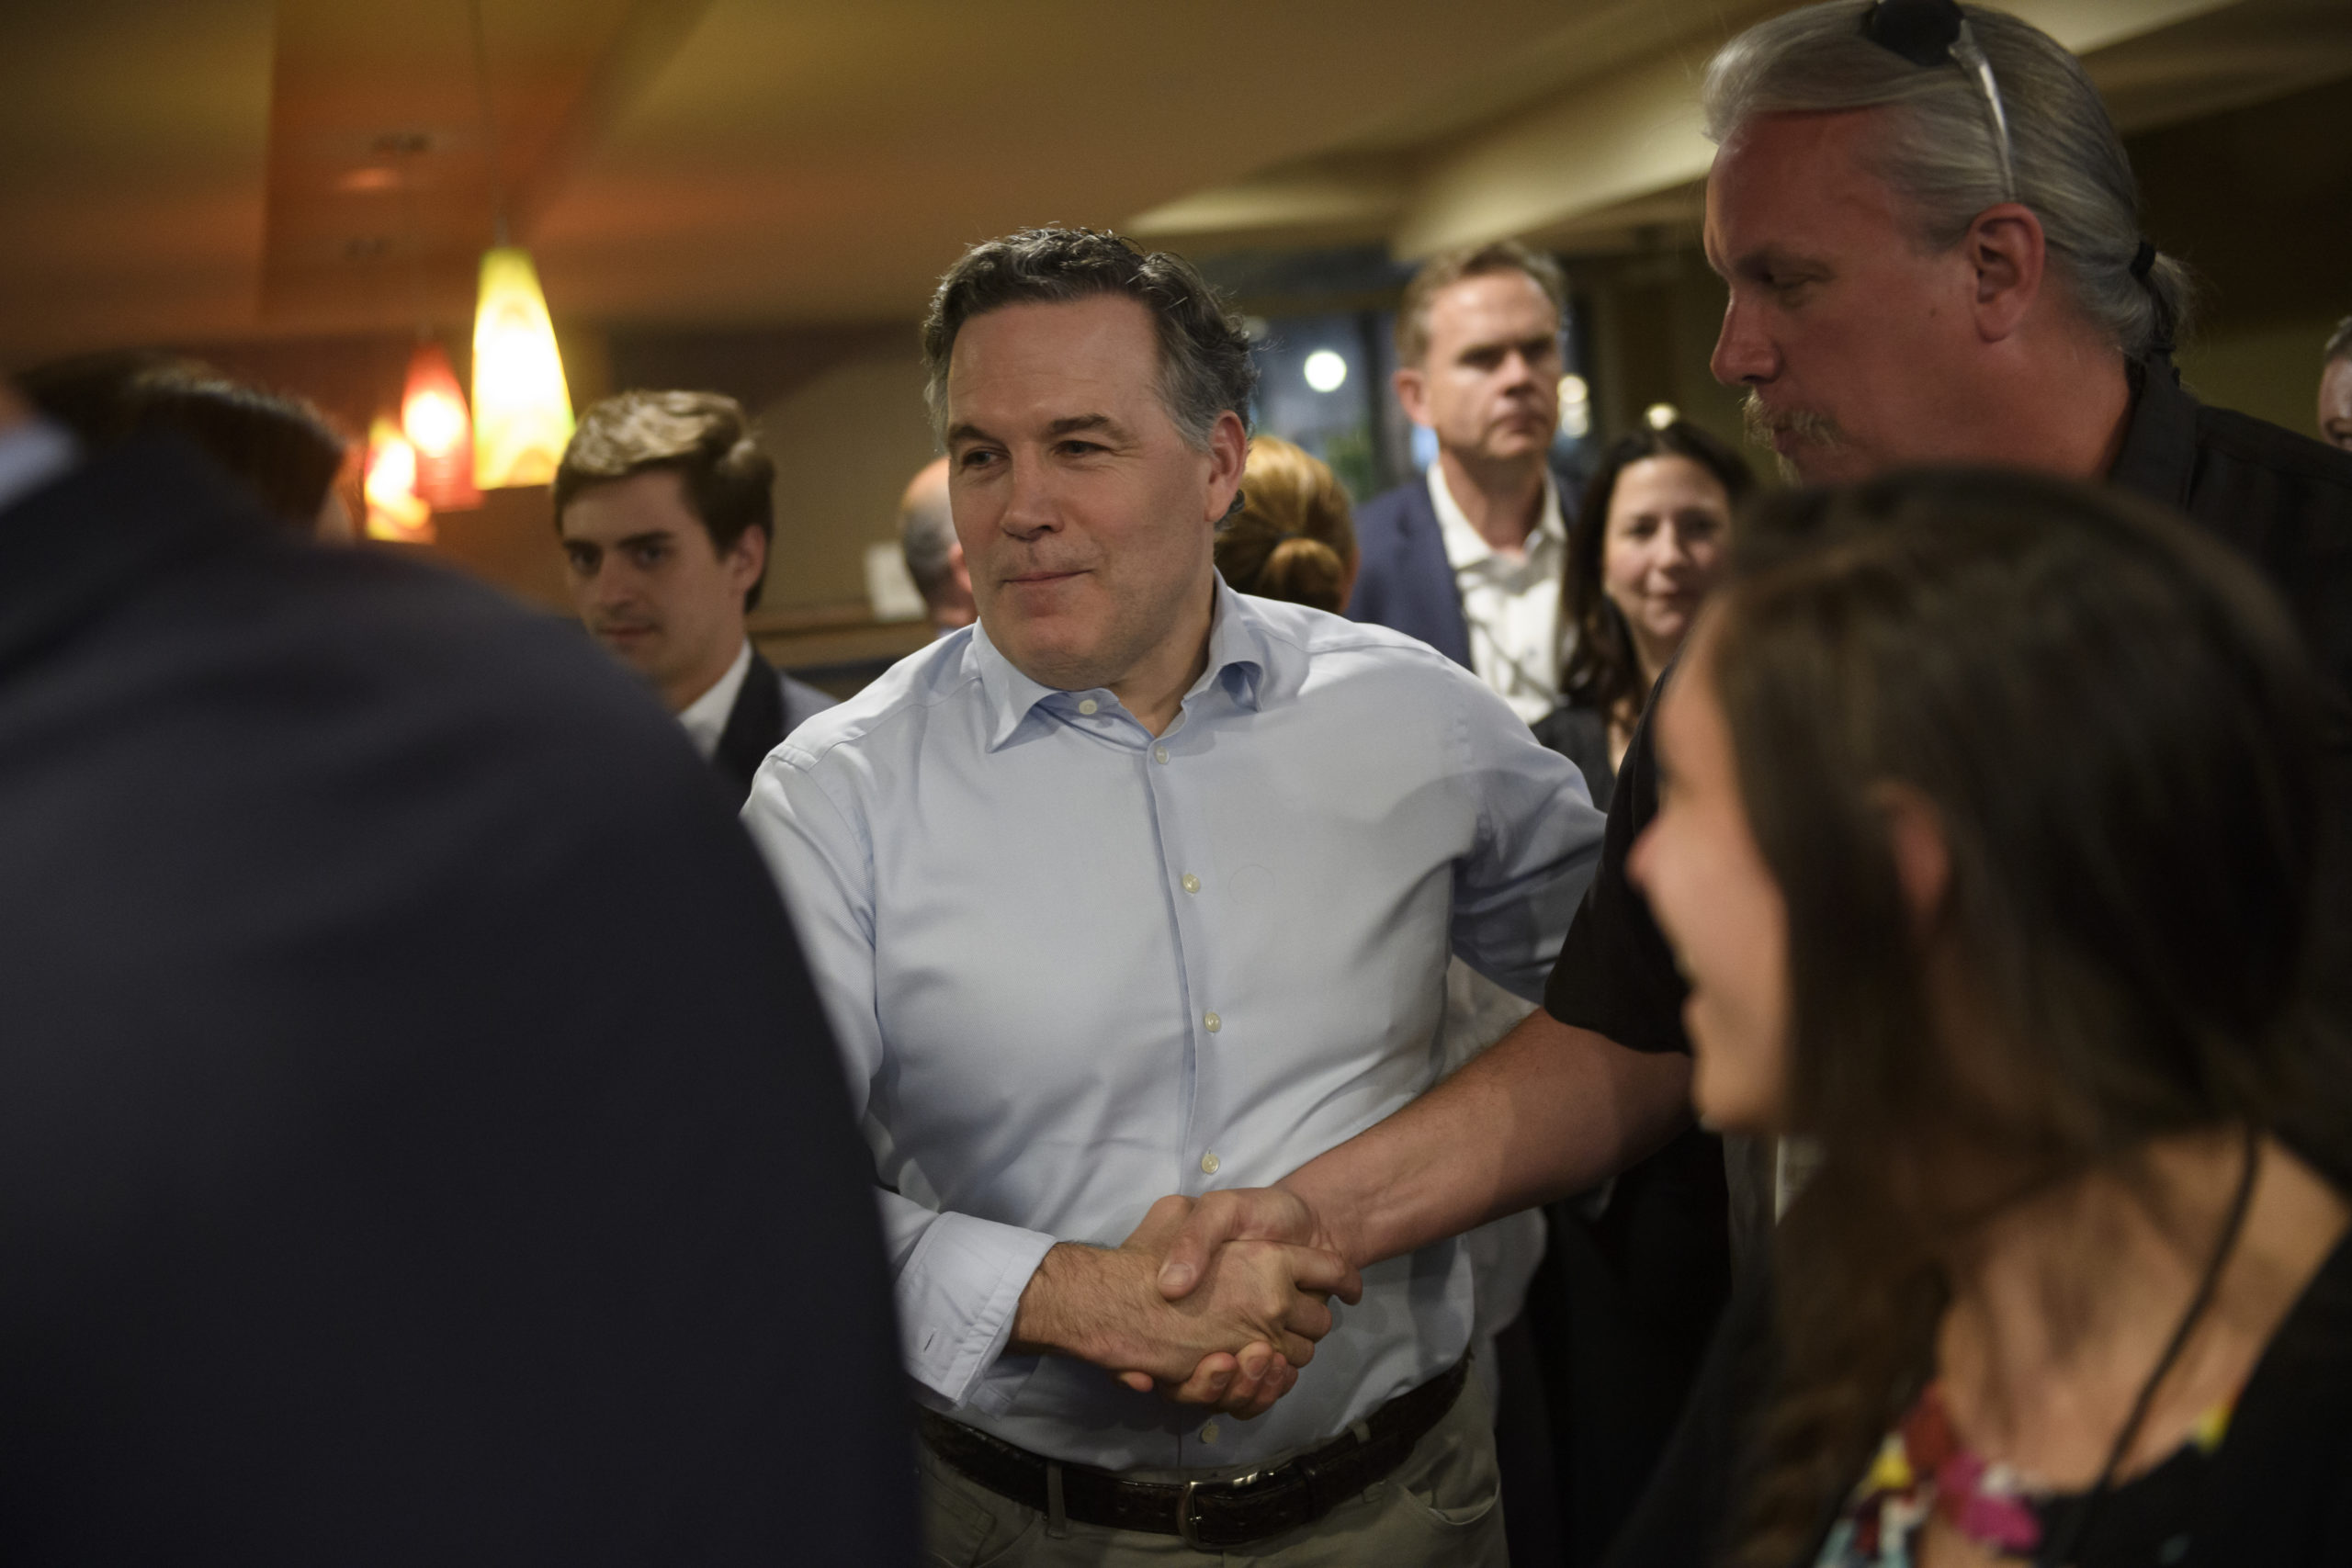 Pennsylvania GOP U.S. Senate candidate Dave McCormick greets supporters at the Indigo Hotel Tuesday evening after the polls revealed he had an early lead over Dr Mehmet Oz in the primary race on May 17, 2022 in Pittsburgh, Pennsylvania. (Photo by Jeff Swensen/Getty Images)